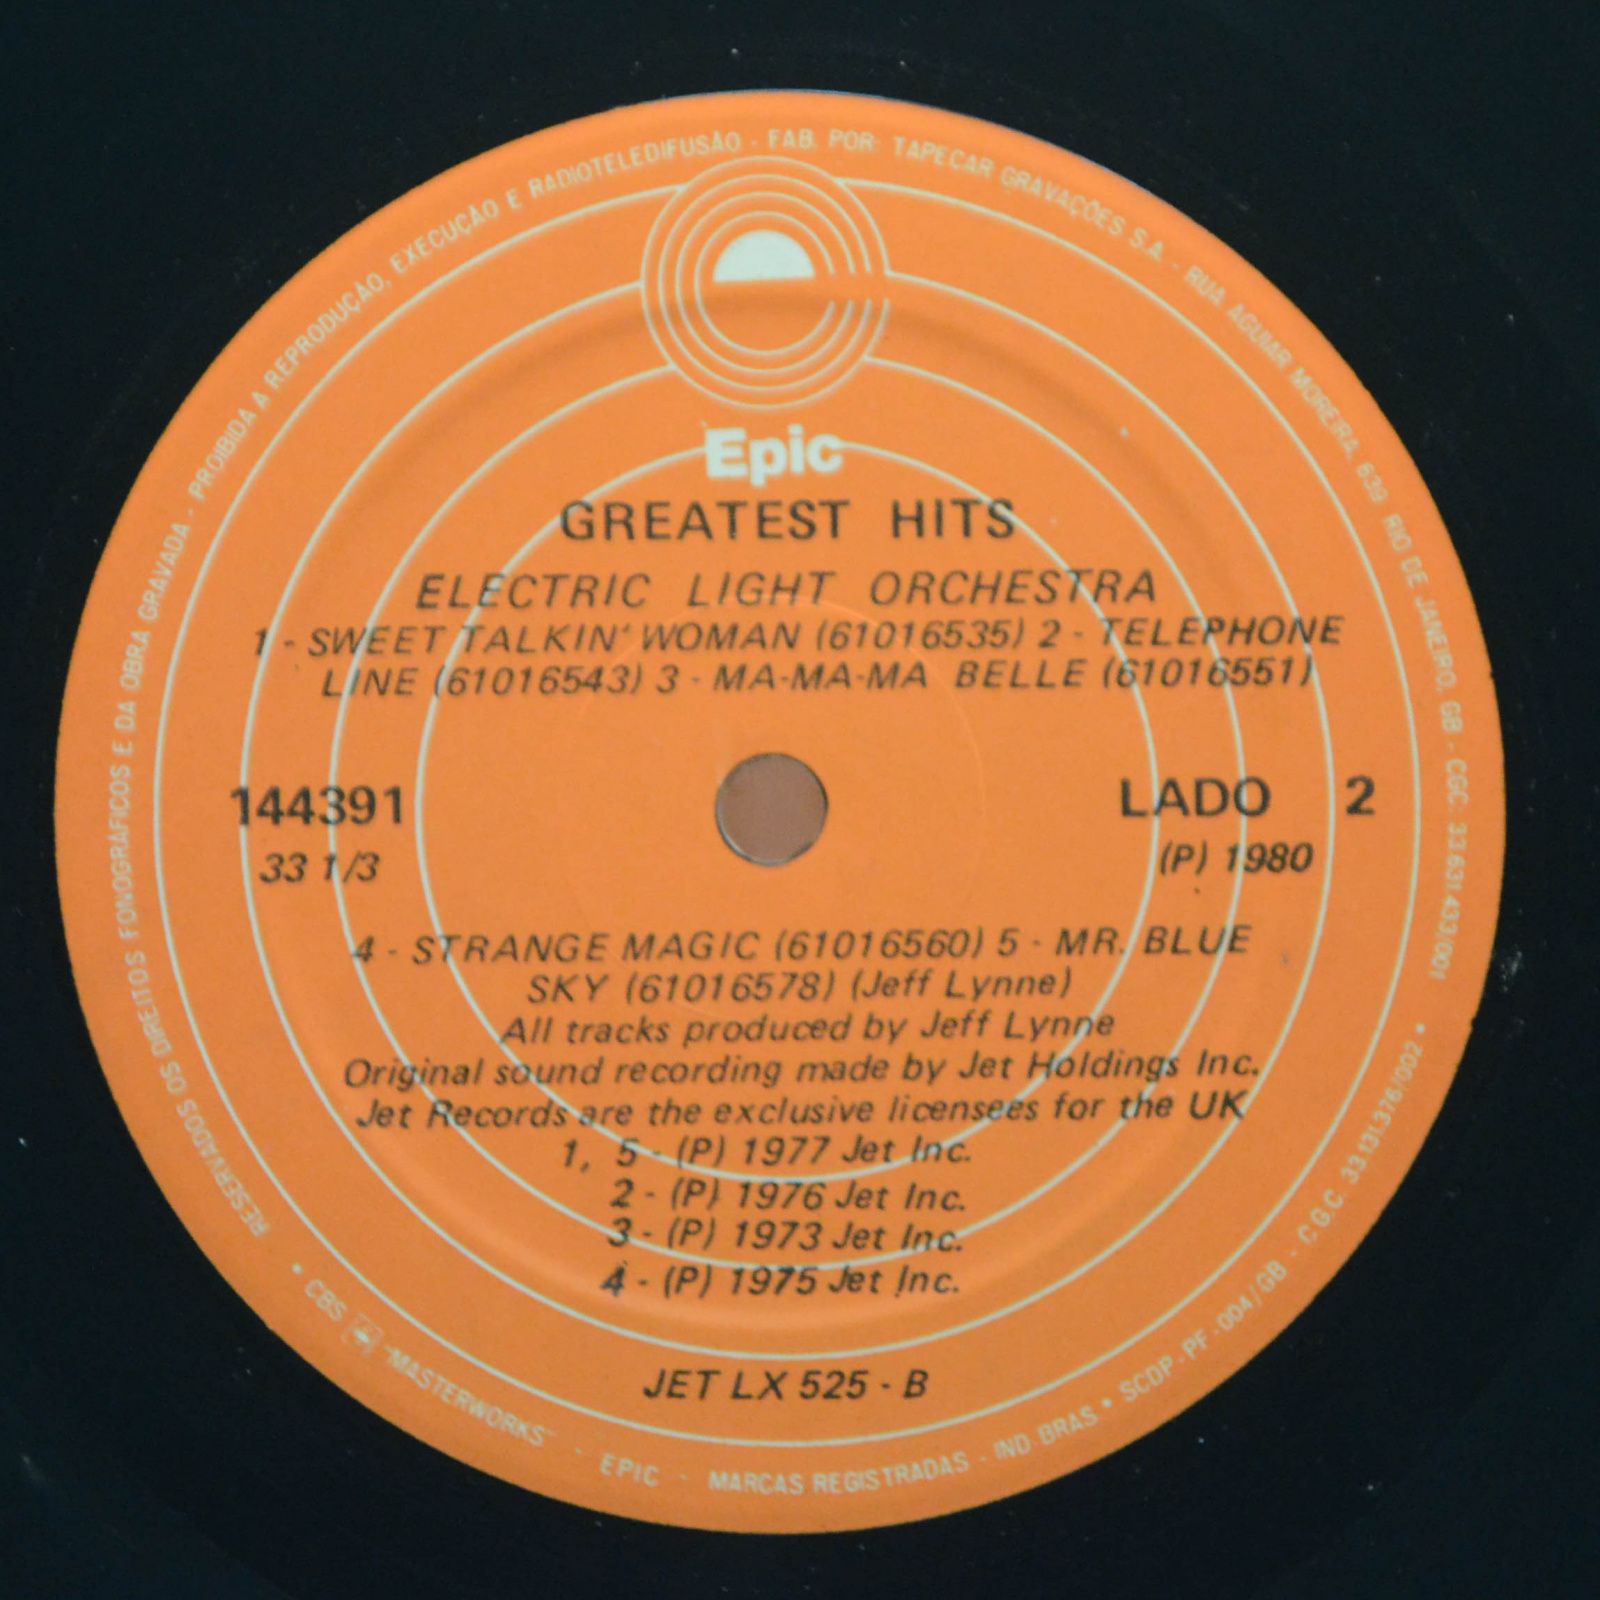 Electric Light Orchestra — ELO's Greatest Hits, 1979